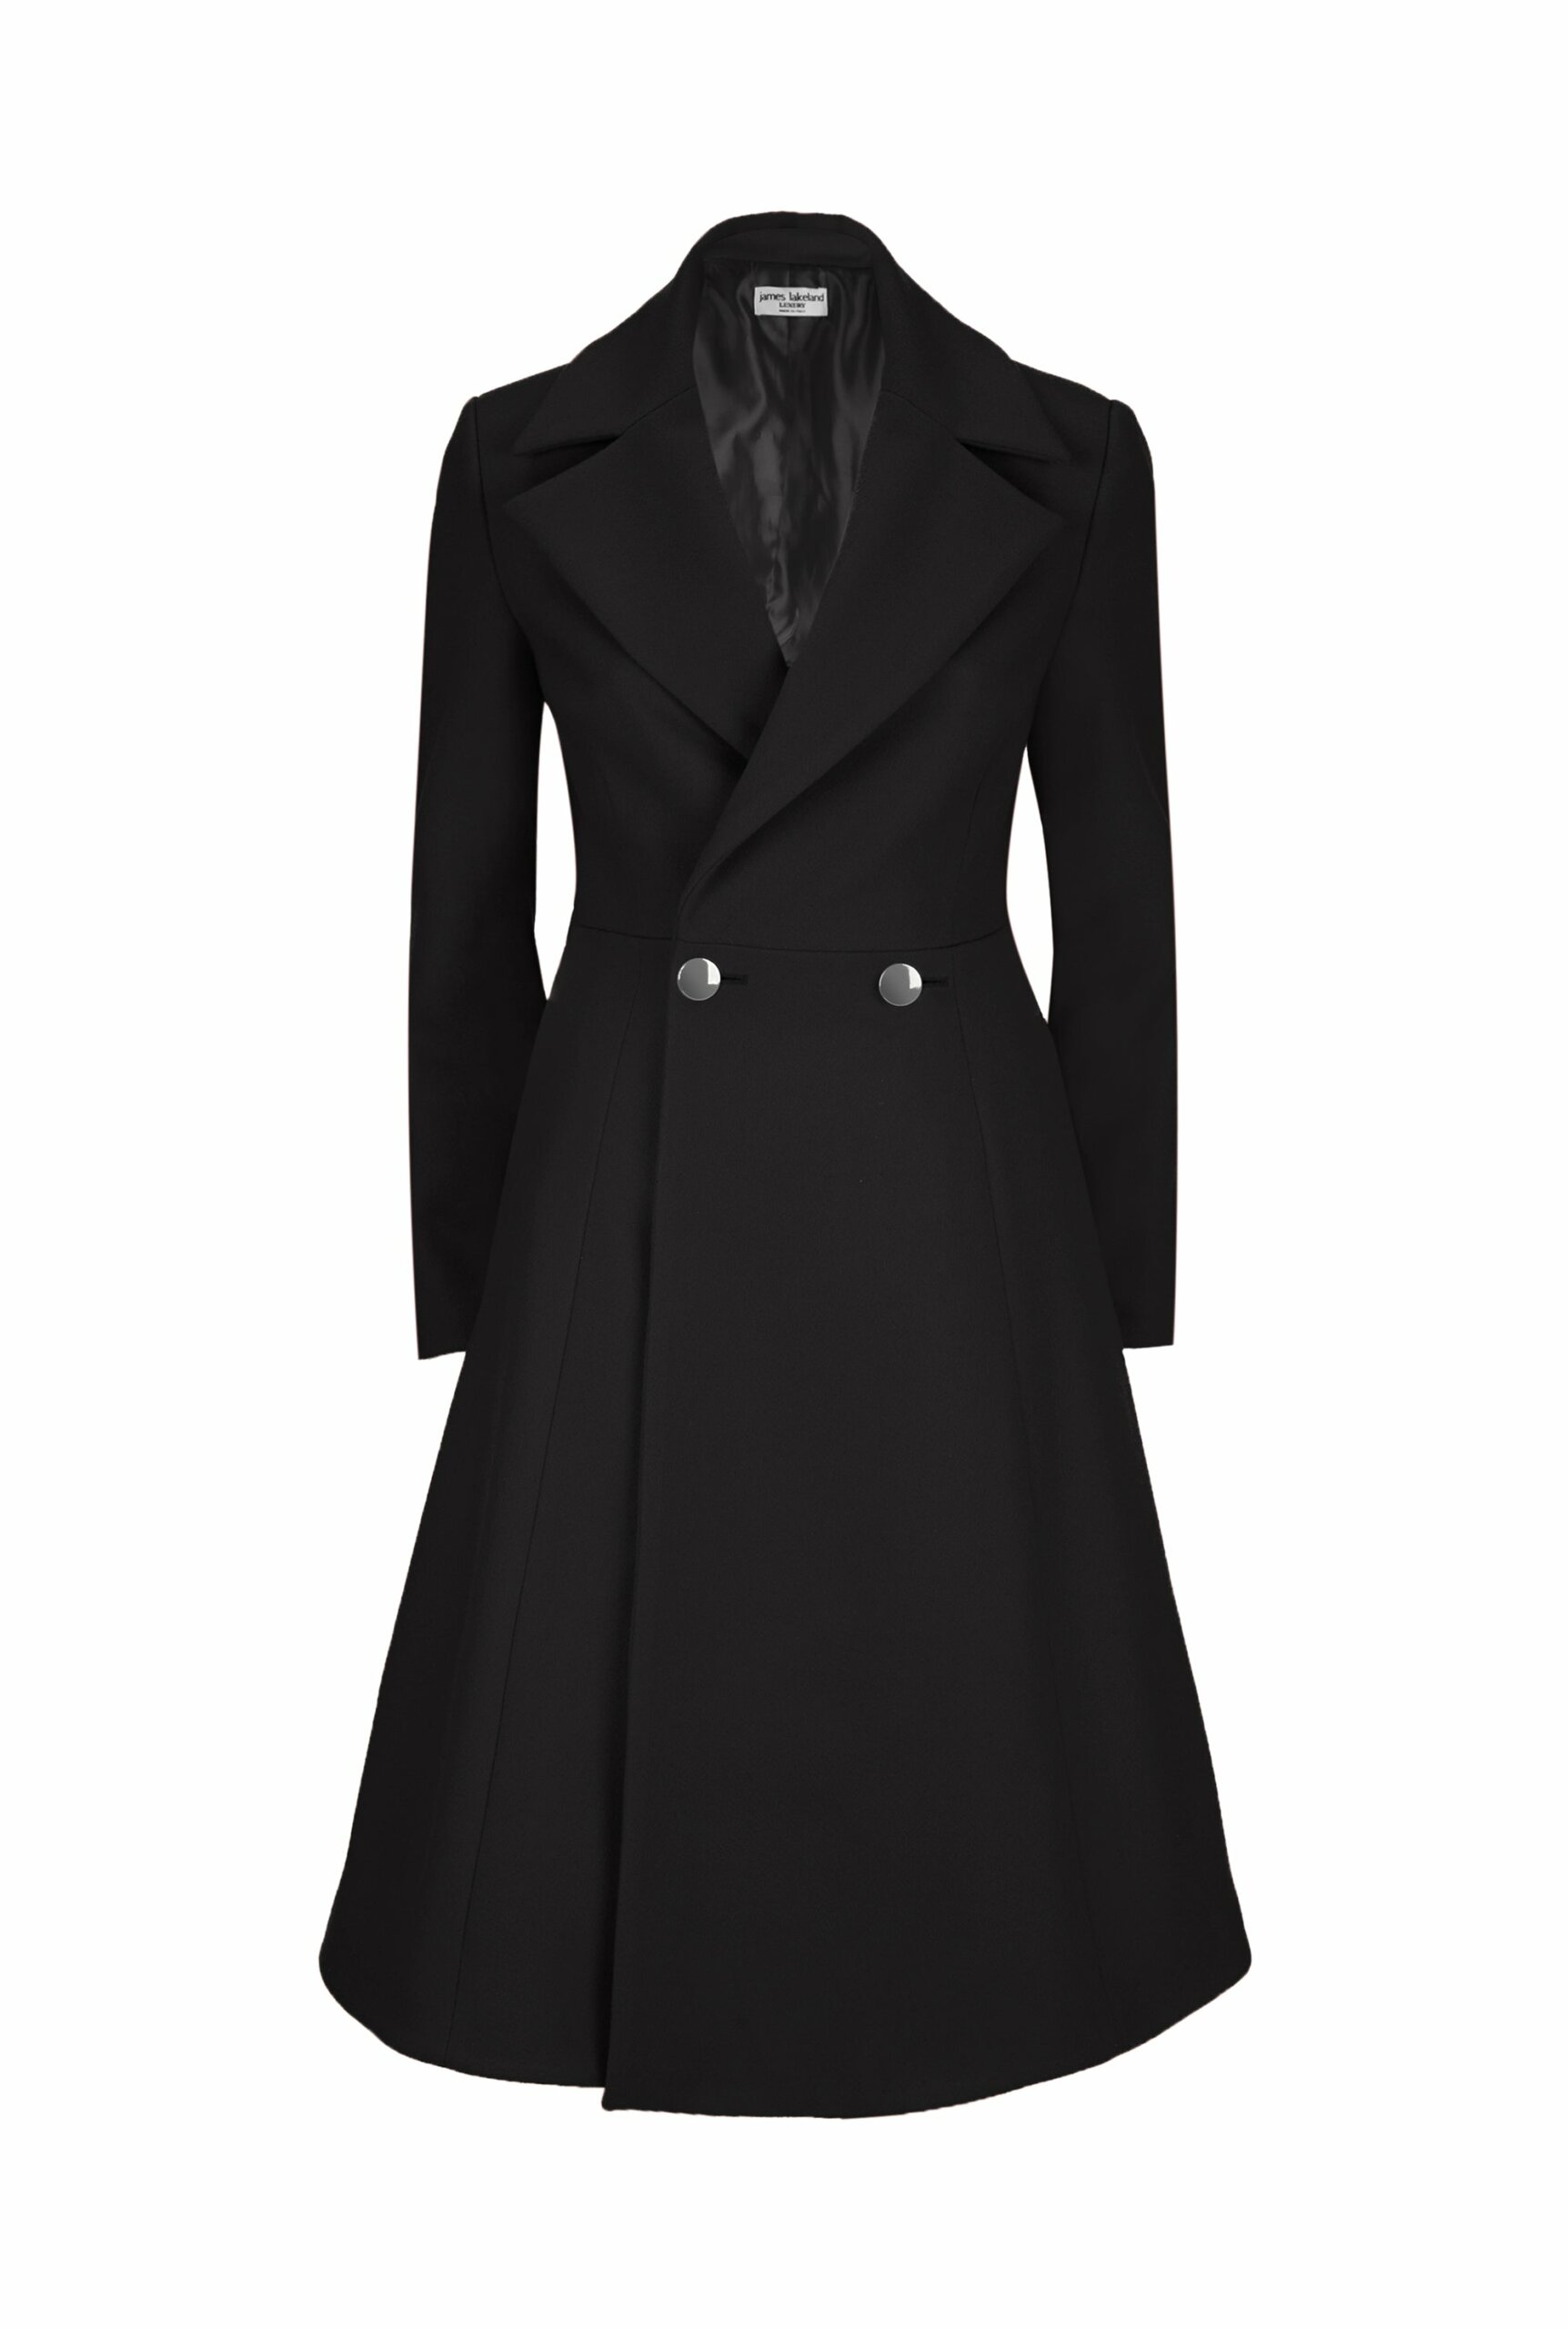 Women's Double Breasted A-Line Coat - Black Extra Large James Lakeland